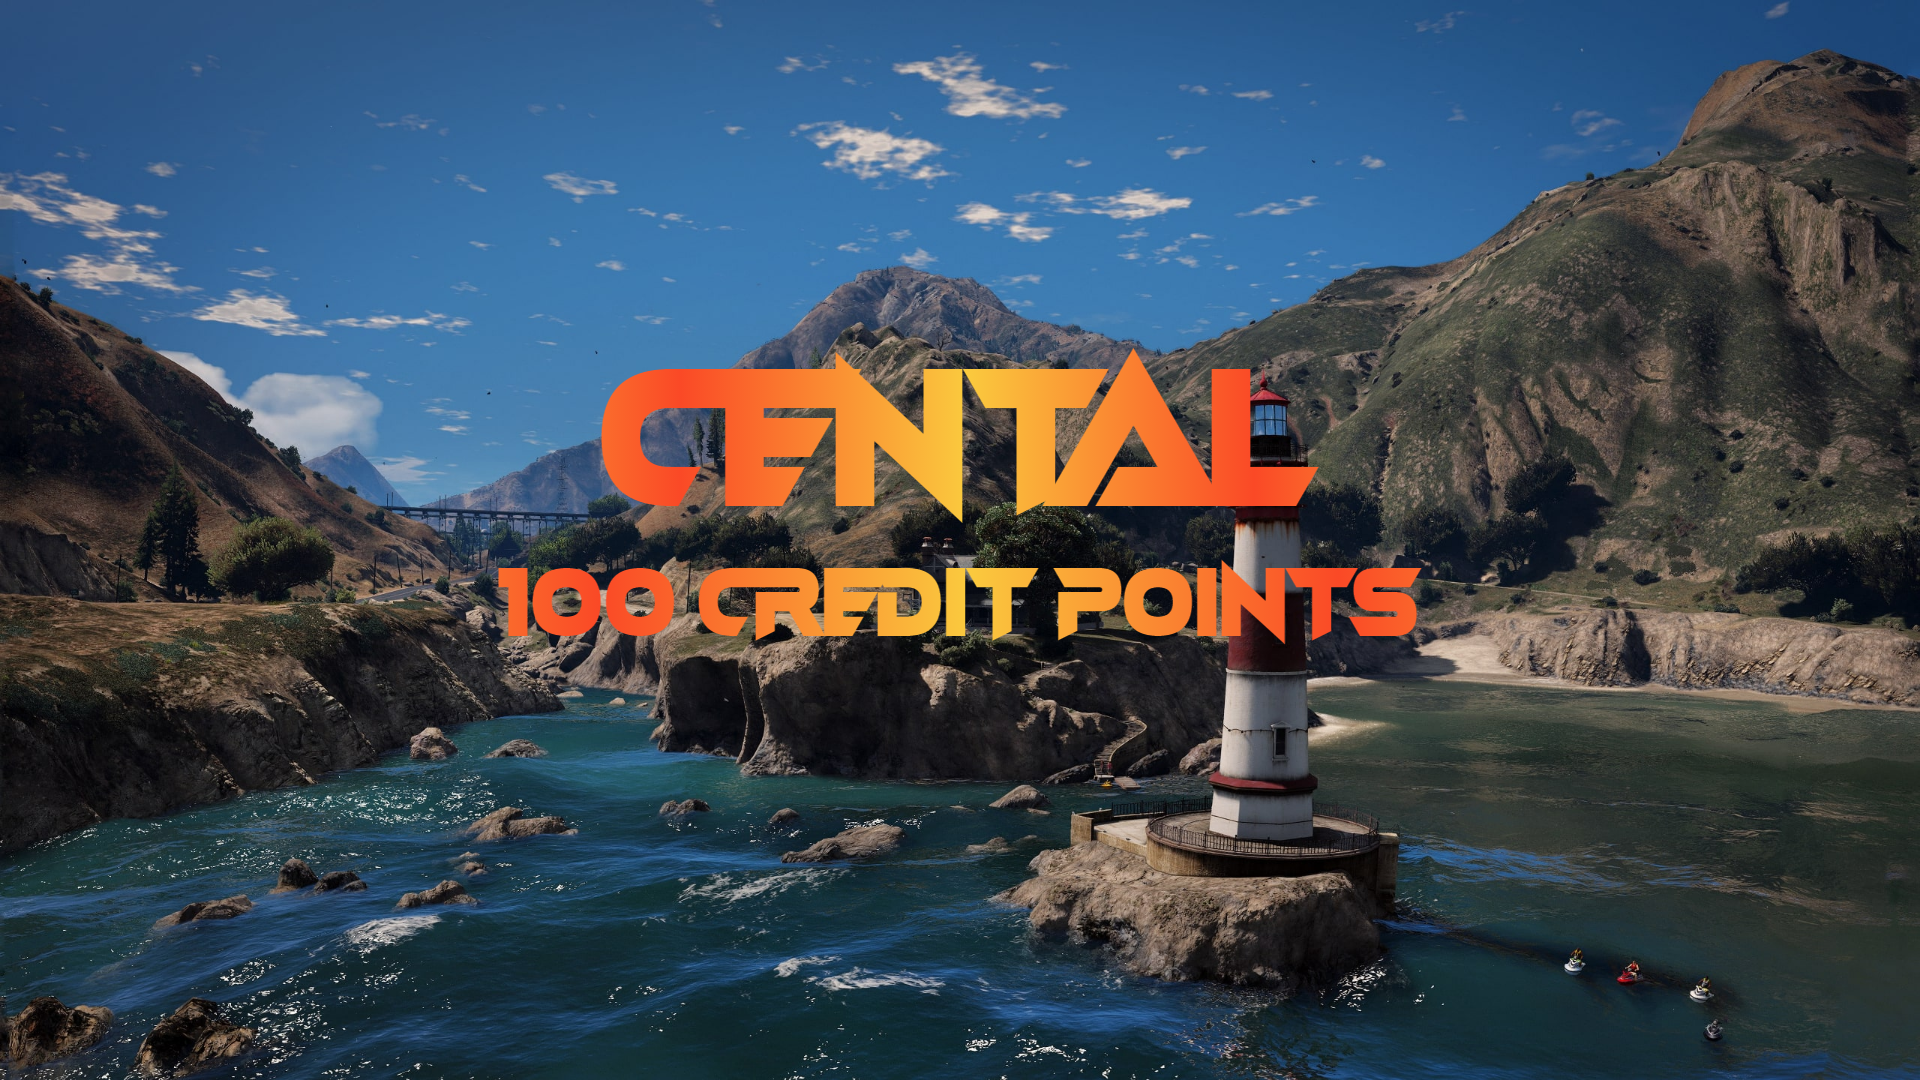 CentralRP - 100 Credit Points Gift Card, 11.29$